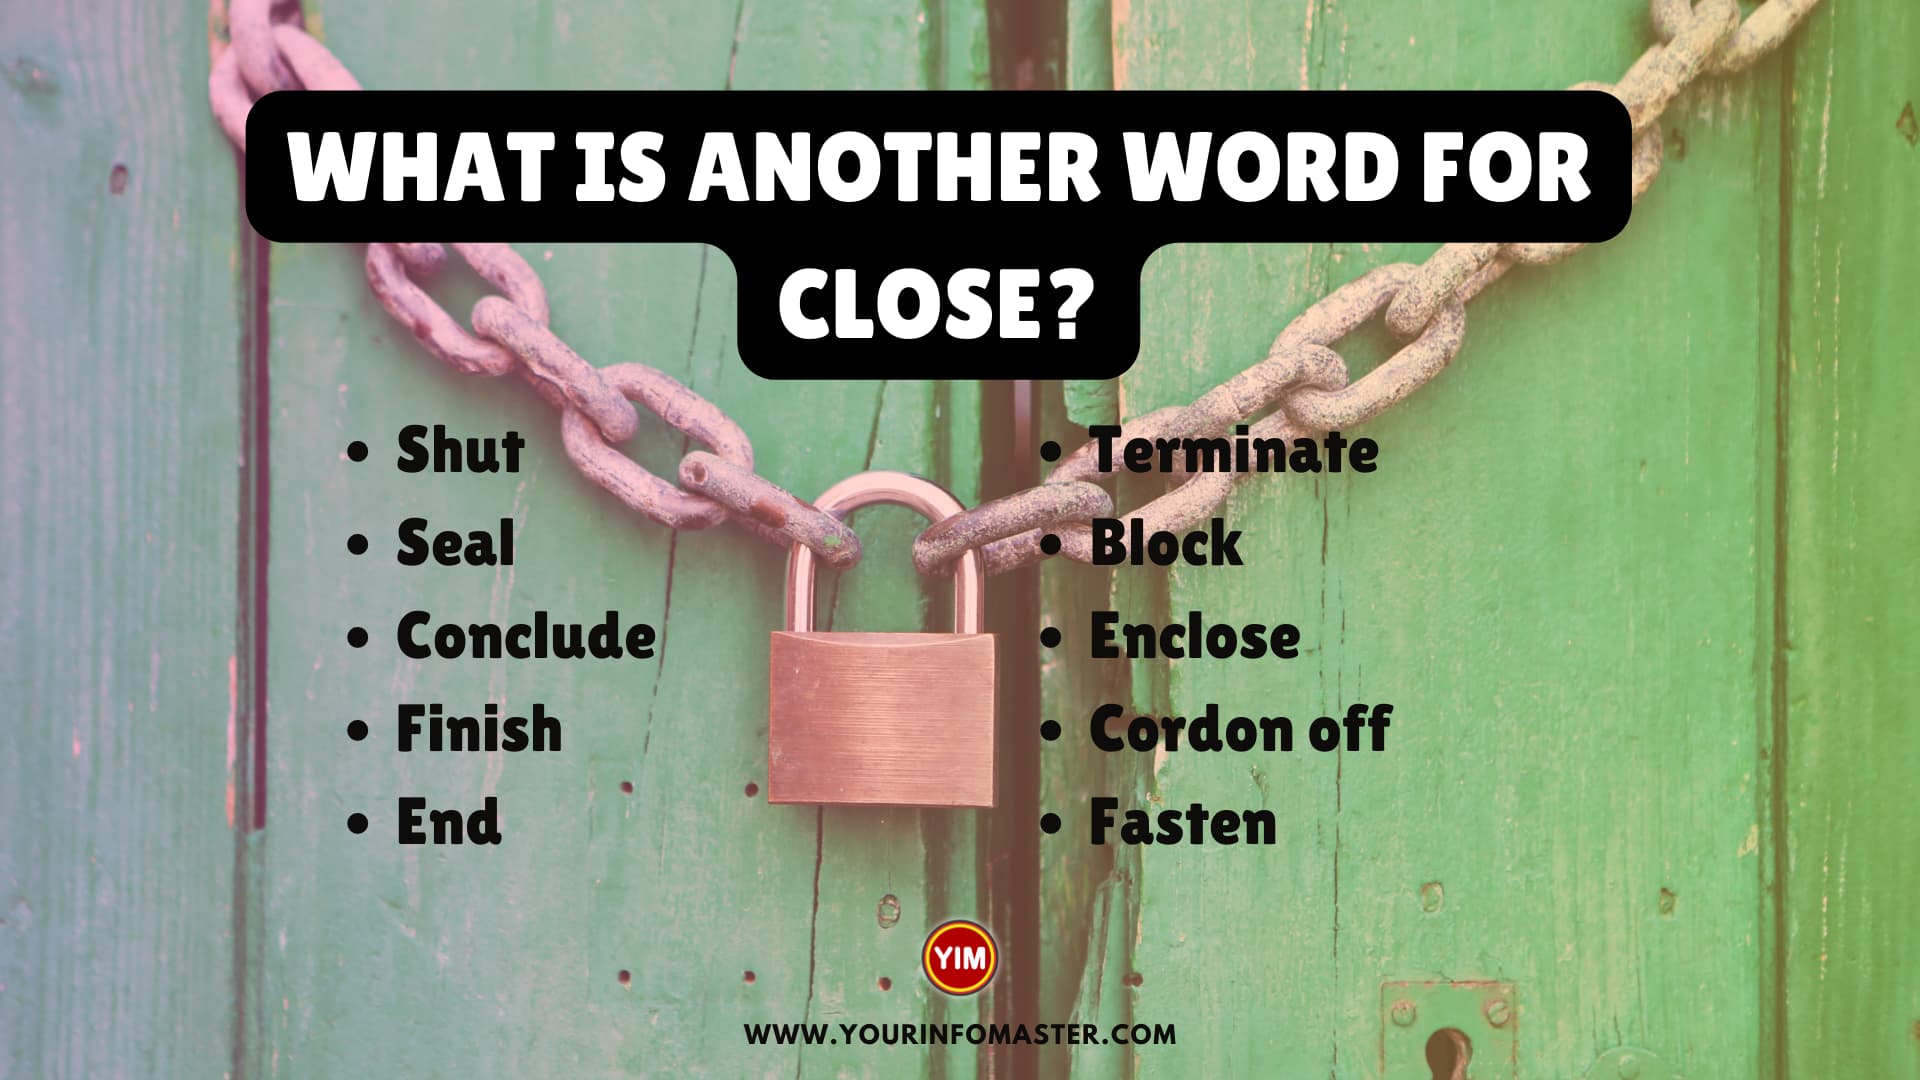 What is another word for Close